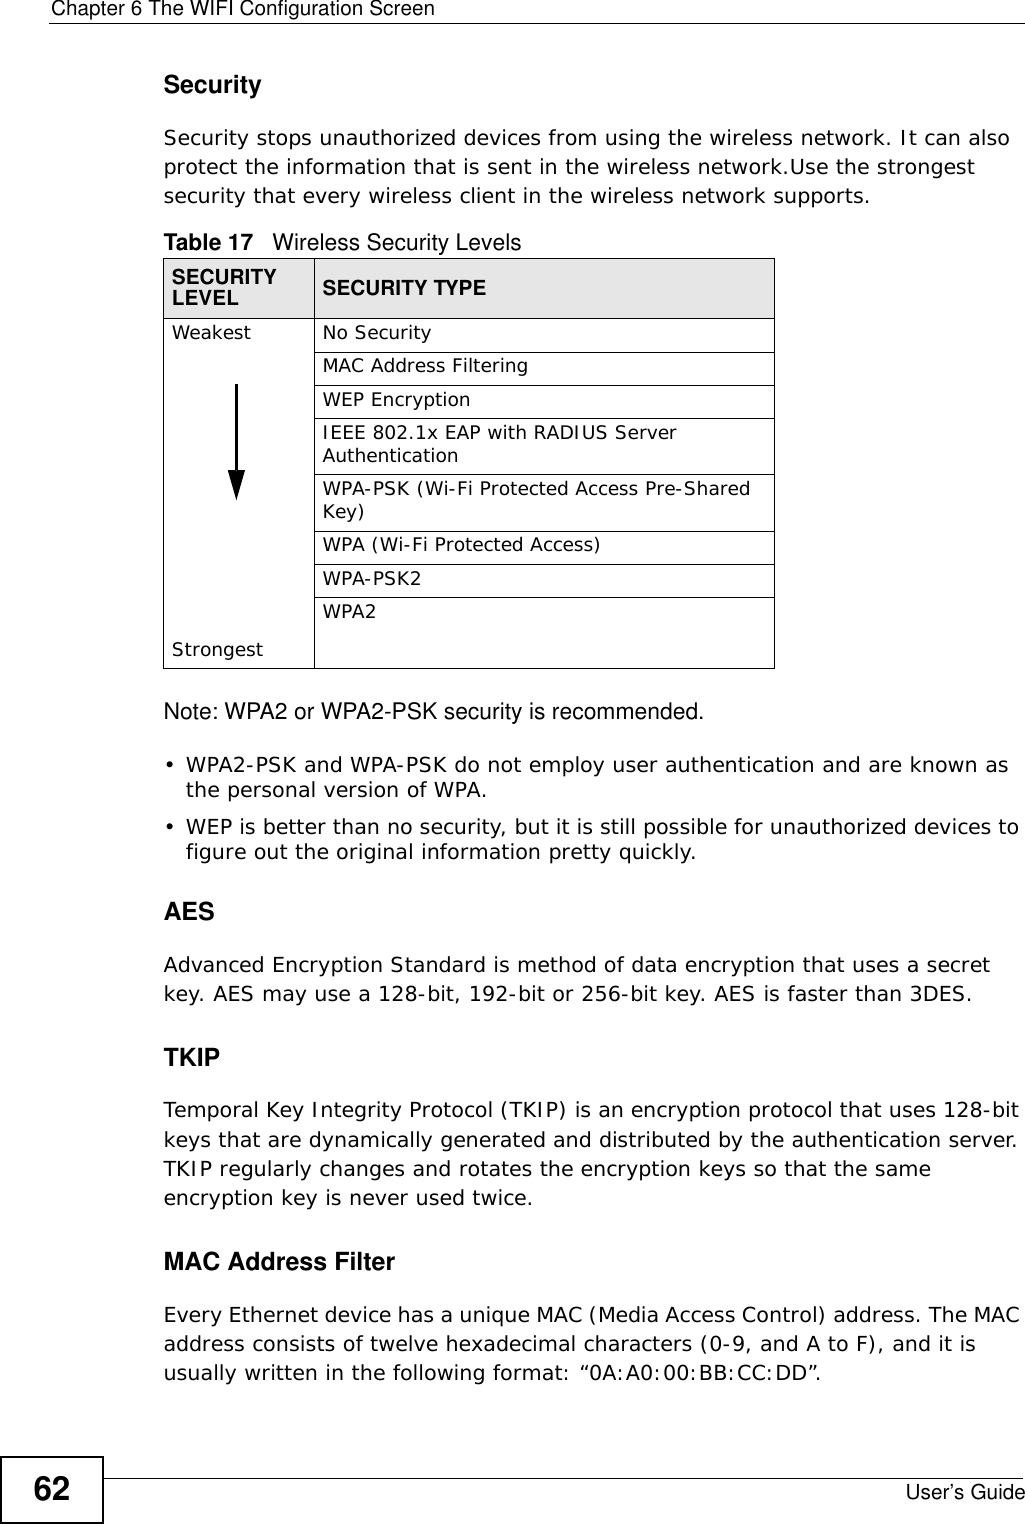 Chapter 6 The WIFI Configuration ScreenUser’s Guide62SecuritySecurity stops unauthorized devices from using the wireless network. It can also protect the information that is sent in the wireless network.Use the strongest security that every wireless client in the wireless network supports.Note: WPA2 or WPA2-PSK security is recommended.• WPA2-PSK and WPA-PSK do not employ user authentication and are known as the personal version of WPA.• WEP is better than no security, but it is still possible for unauthorized devices to figure out the original information pretty quickly.AES Advanced Encryption Standard is method of data encryption that uses a secret key. AES may use a 128-bit, 192-bit or 256-bit key. AES is faster than 3DES.TKIP Temporal Key Integrity Protocol (TKIP) is an encryption protocol that uses 128-bit keys that are dynamically generated and distributed by the authentication server. TKIP regularly changes and rotates the encryption keys so that the same encryption key is never used twice.MAC Address FilterEvery Ethernet device has a unique MAC (Media Access Control) address. The MAC address consists of twelve hexadecimal characters (0-9, and A to F), and it is usually written in the following format: “0A:A0:00:BB:CC:DD”. Table 17   Wireless Security LevelsSECURITY LEVEL SECURITY TYPEWeakest  StrongestNo SecurityMAC Address FilteringWEP EncryptionIEEE 802.1x EAP with RADIUS Server AuthenticationWPA-PSK (Wi-Fi Protected Access Pre-Shared Key)WPA (Wi-Fi Protected Access)WPA-PSK2WPA2